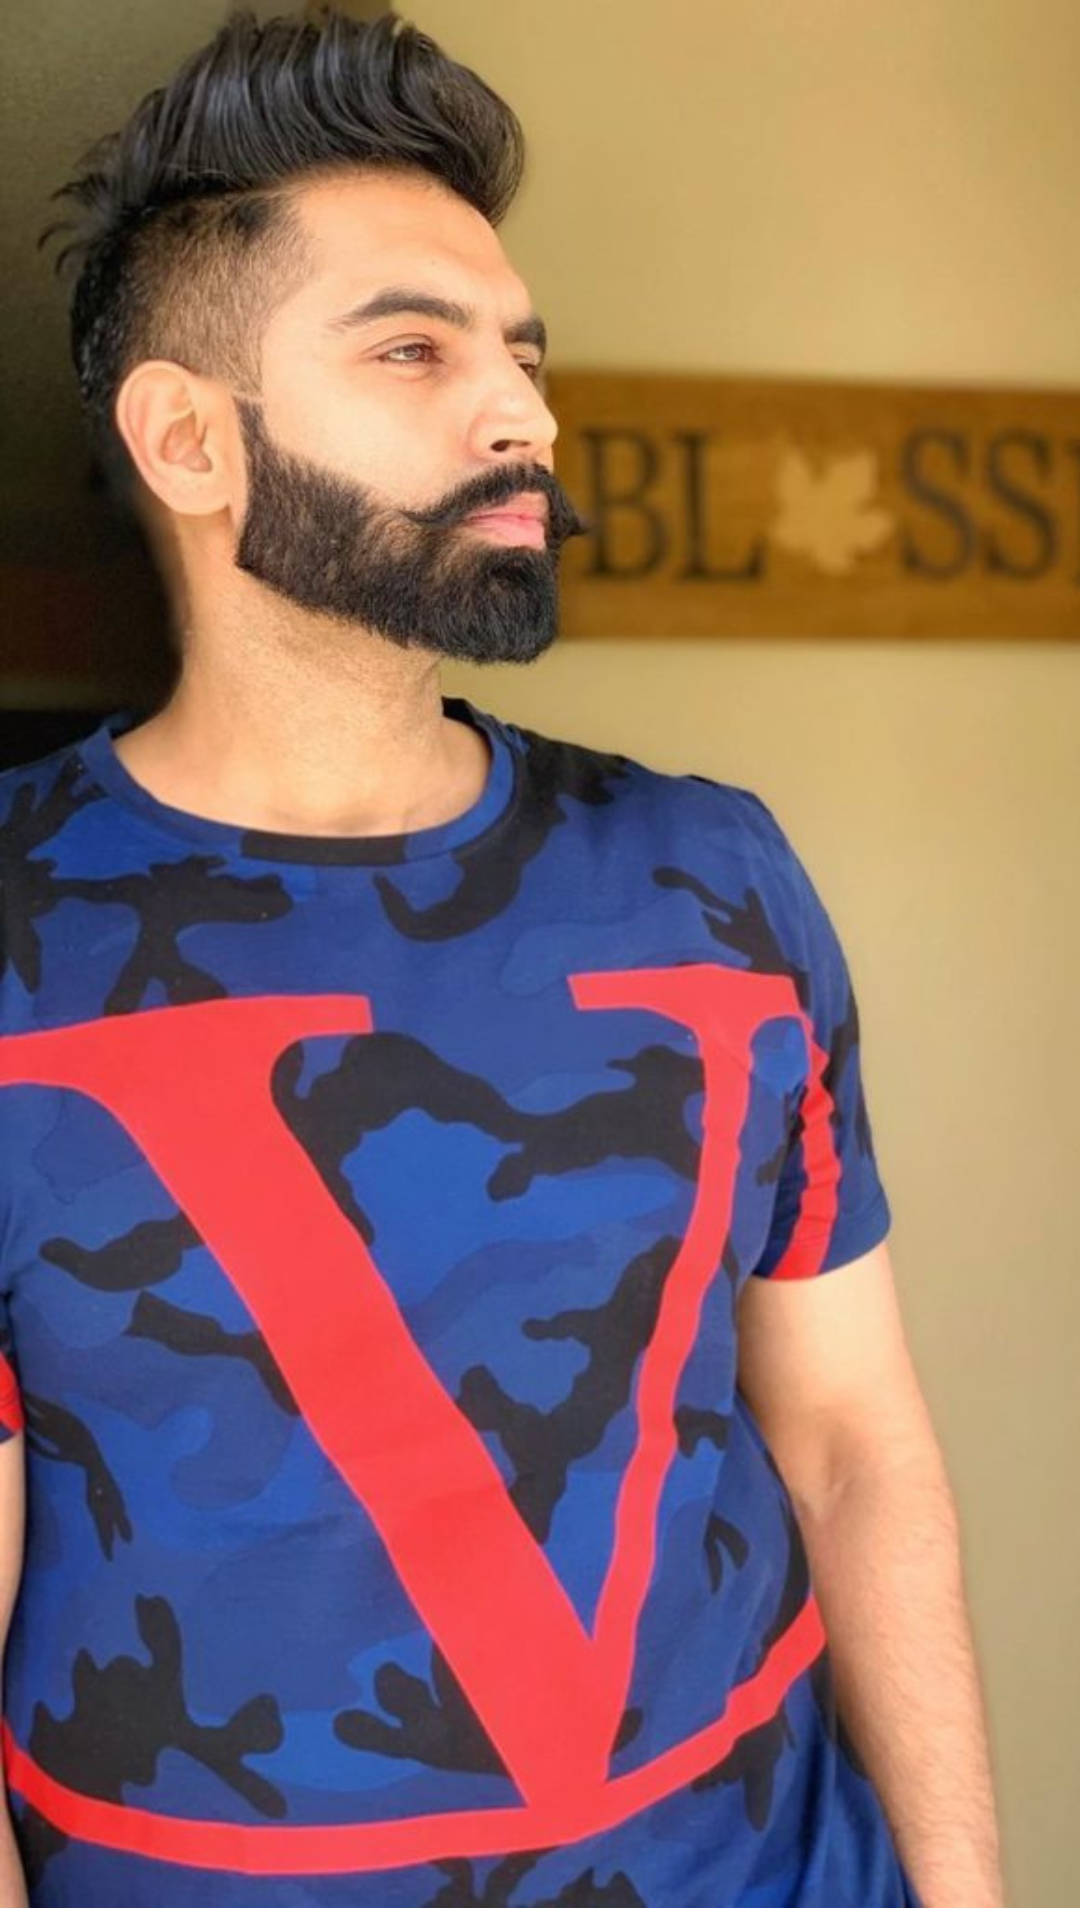 Learn 92+ about parmish verma wallpaper latest .vn